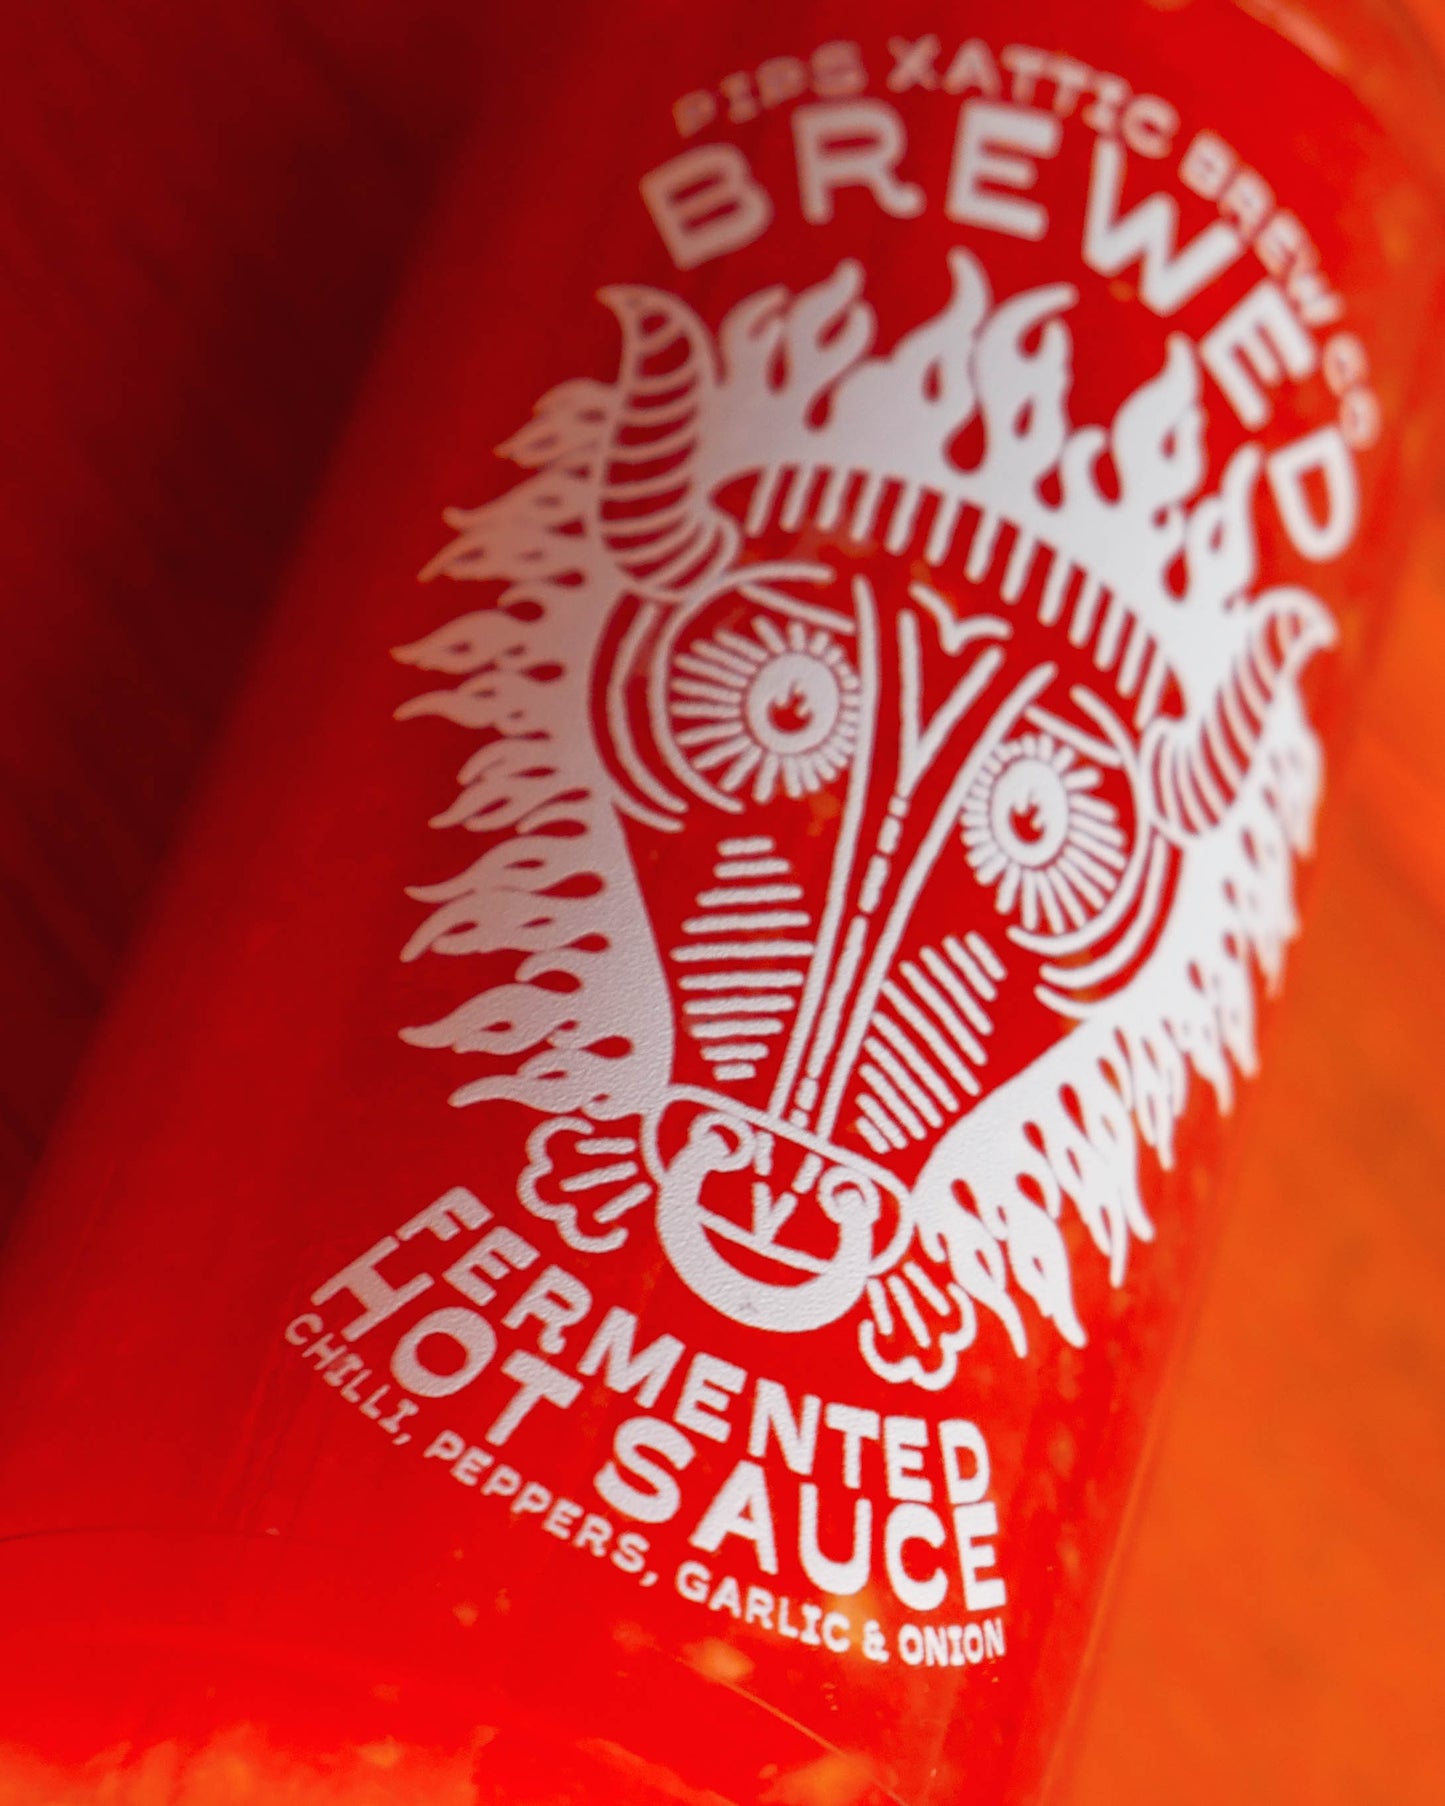 Brewed Fermented Hot Sauce by Pips x Attic Brew Co